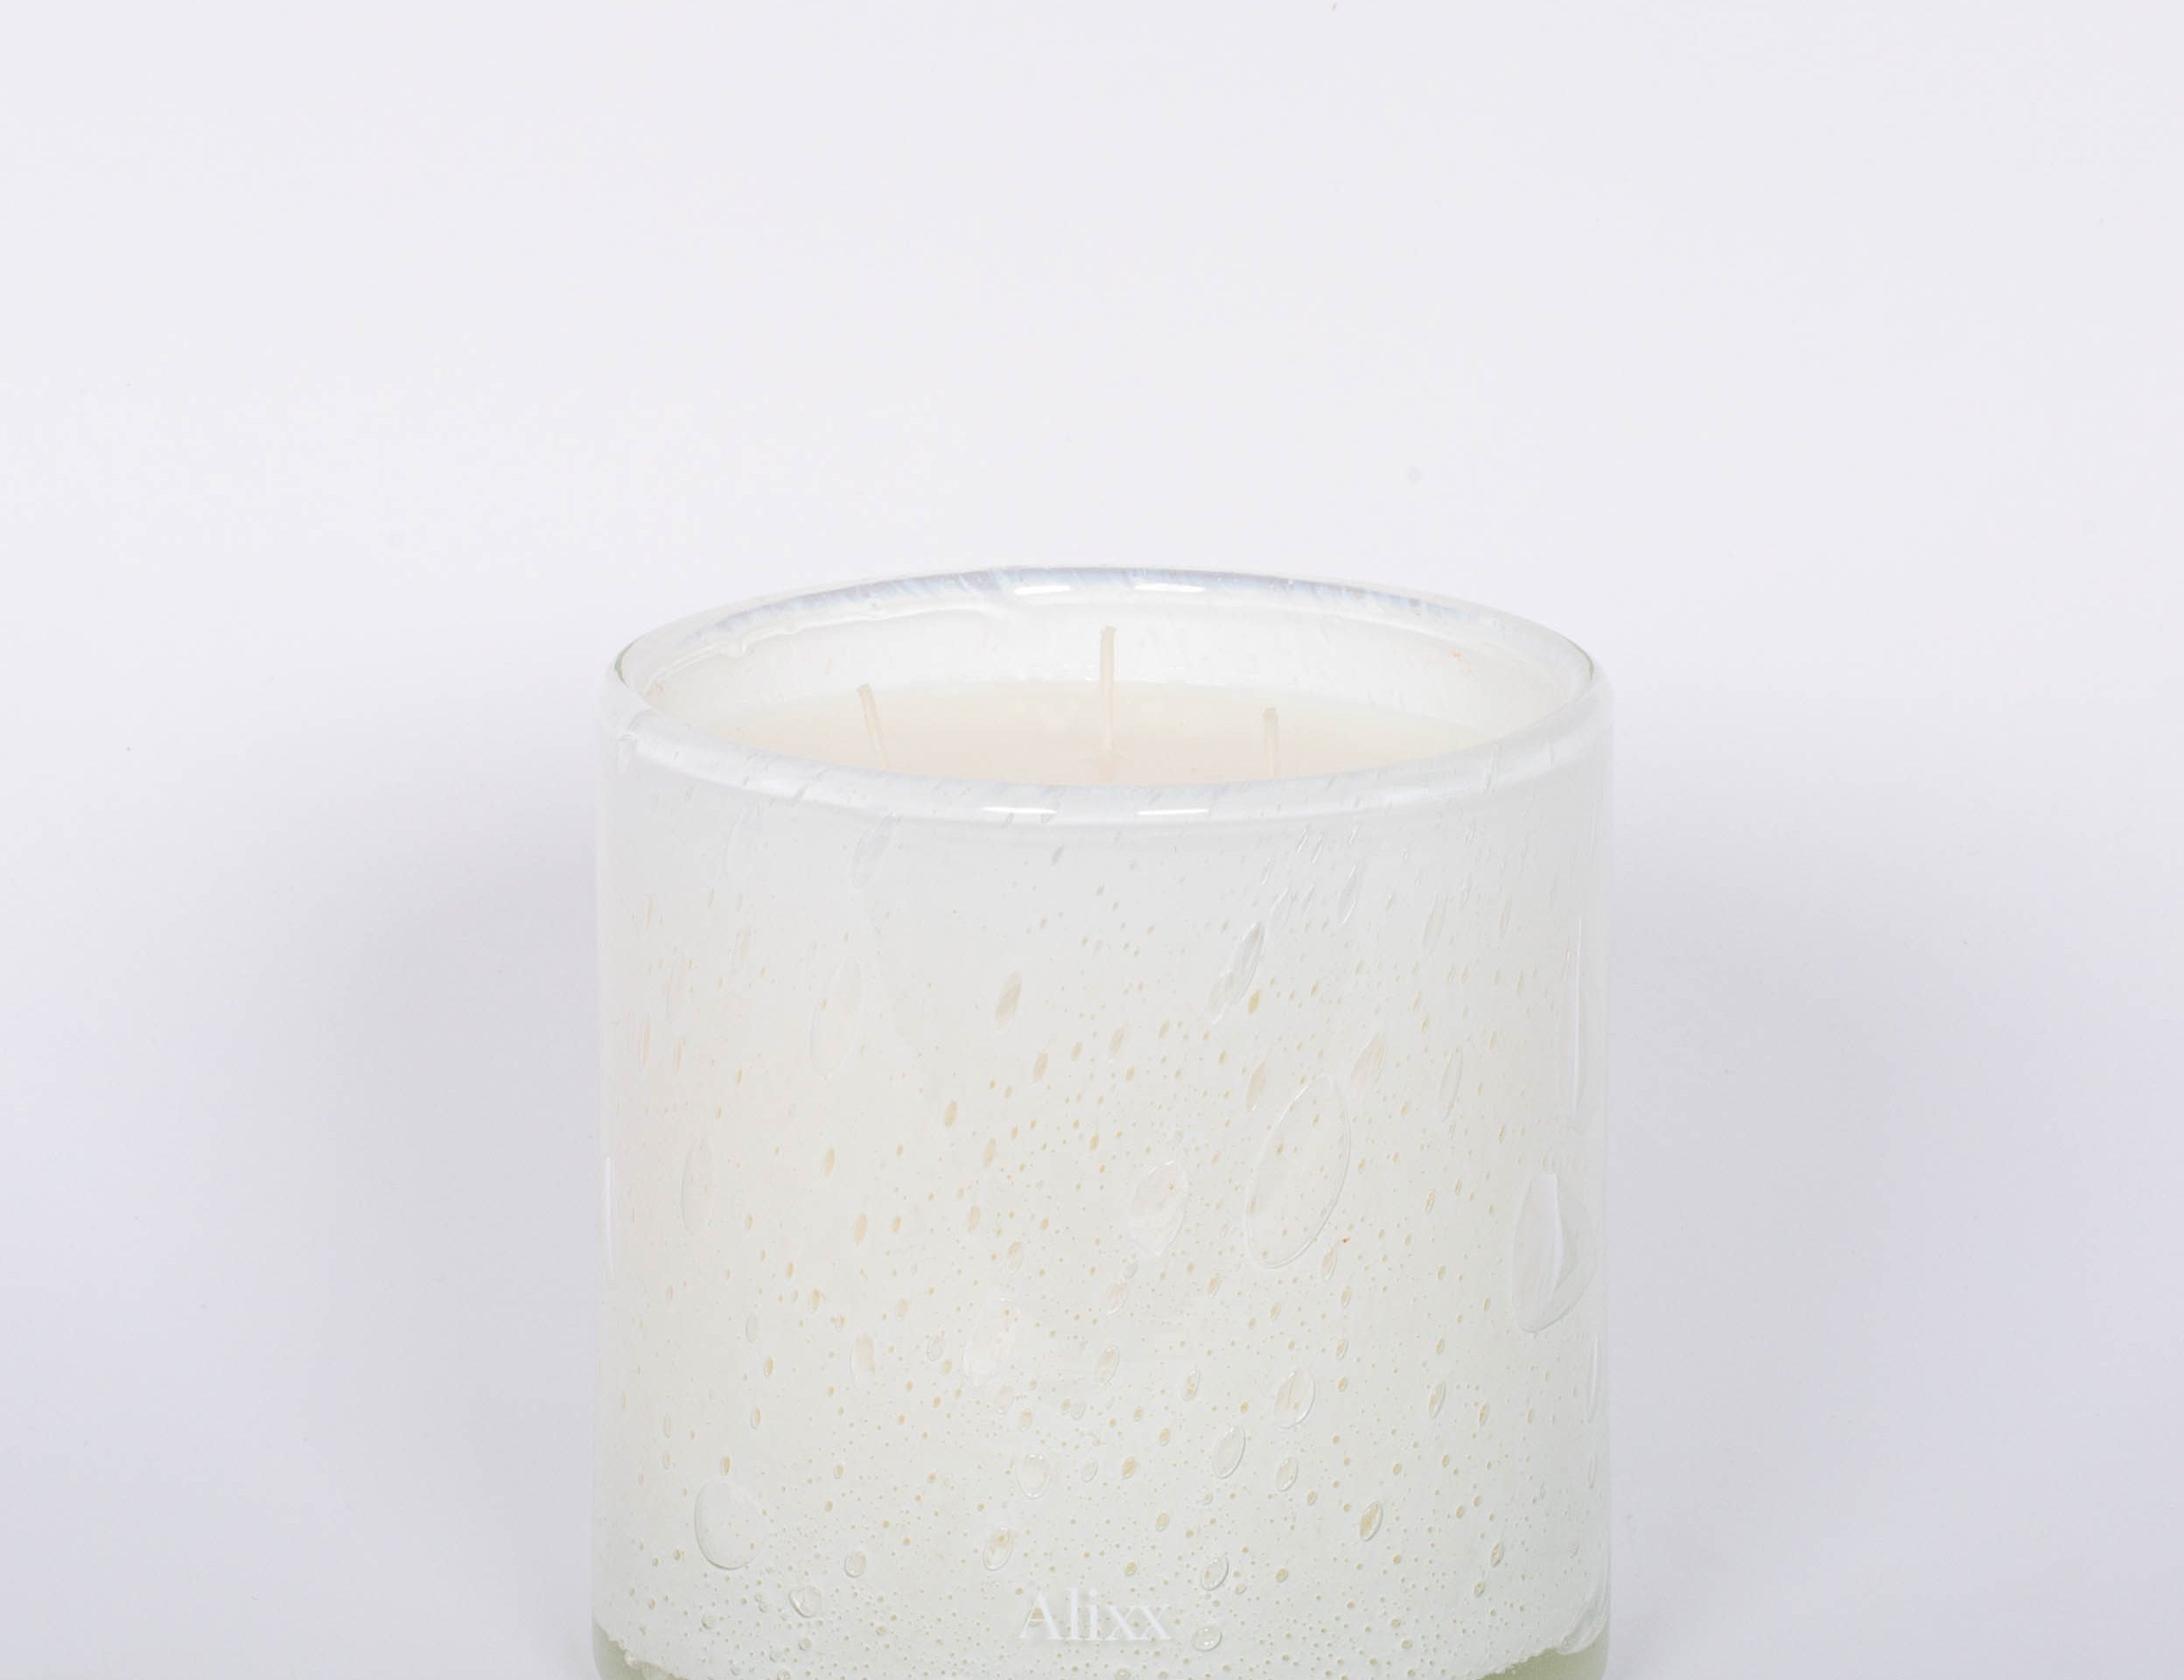 Fleur Blanche Cylindre white bubble glass candle by Alixx with moonflower and violet aroma. White background.